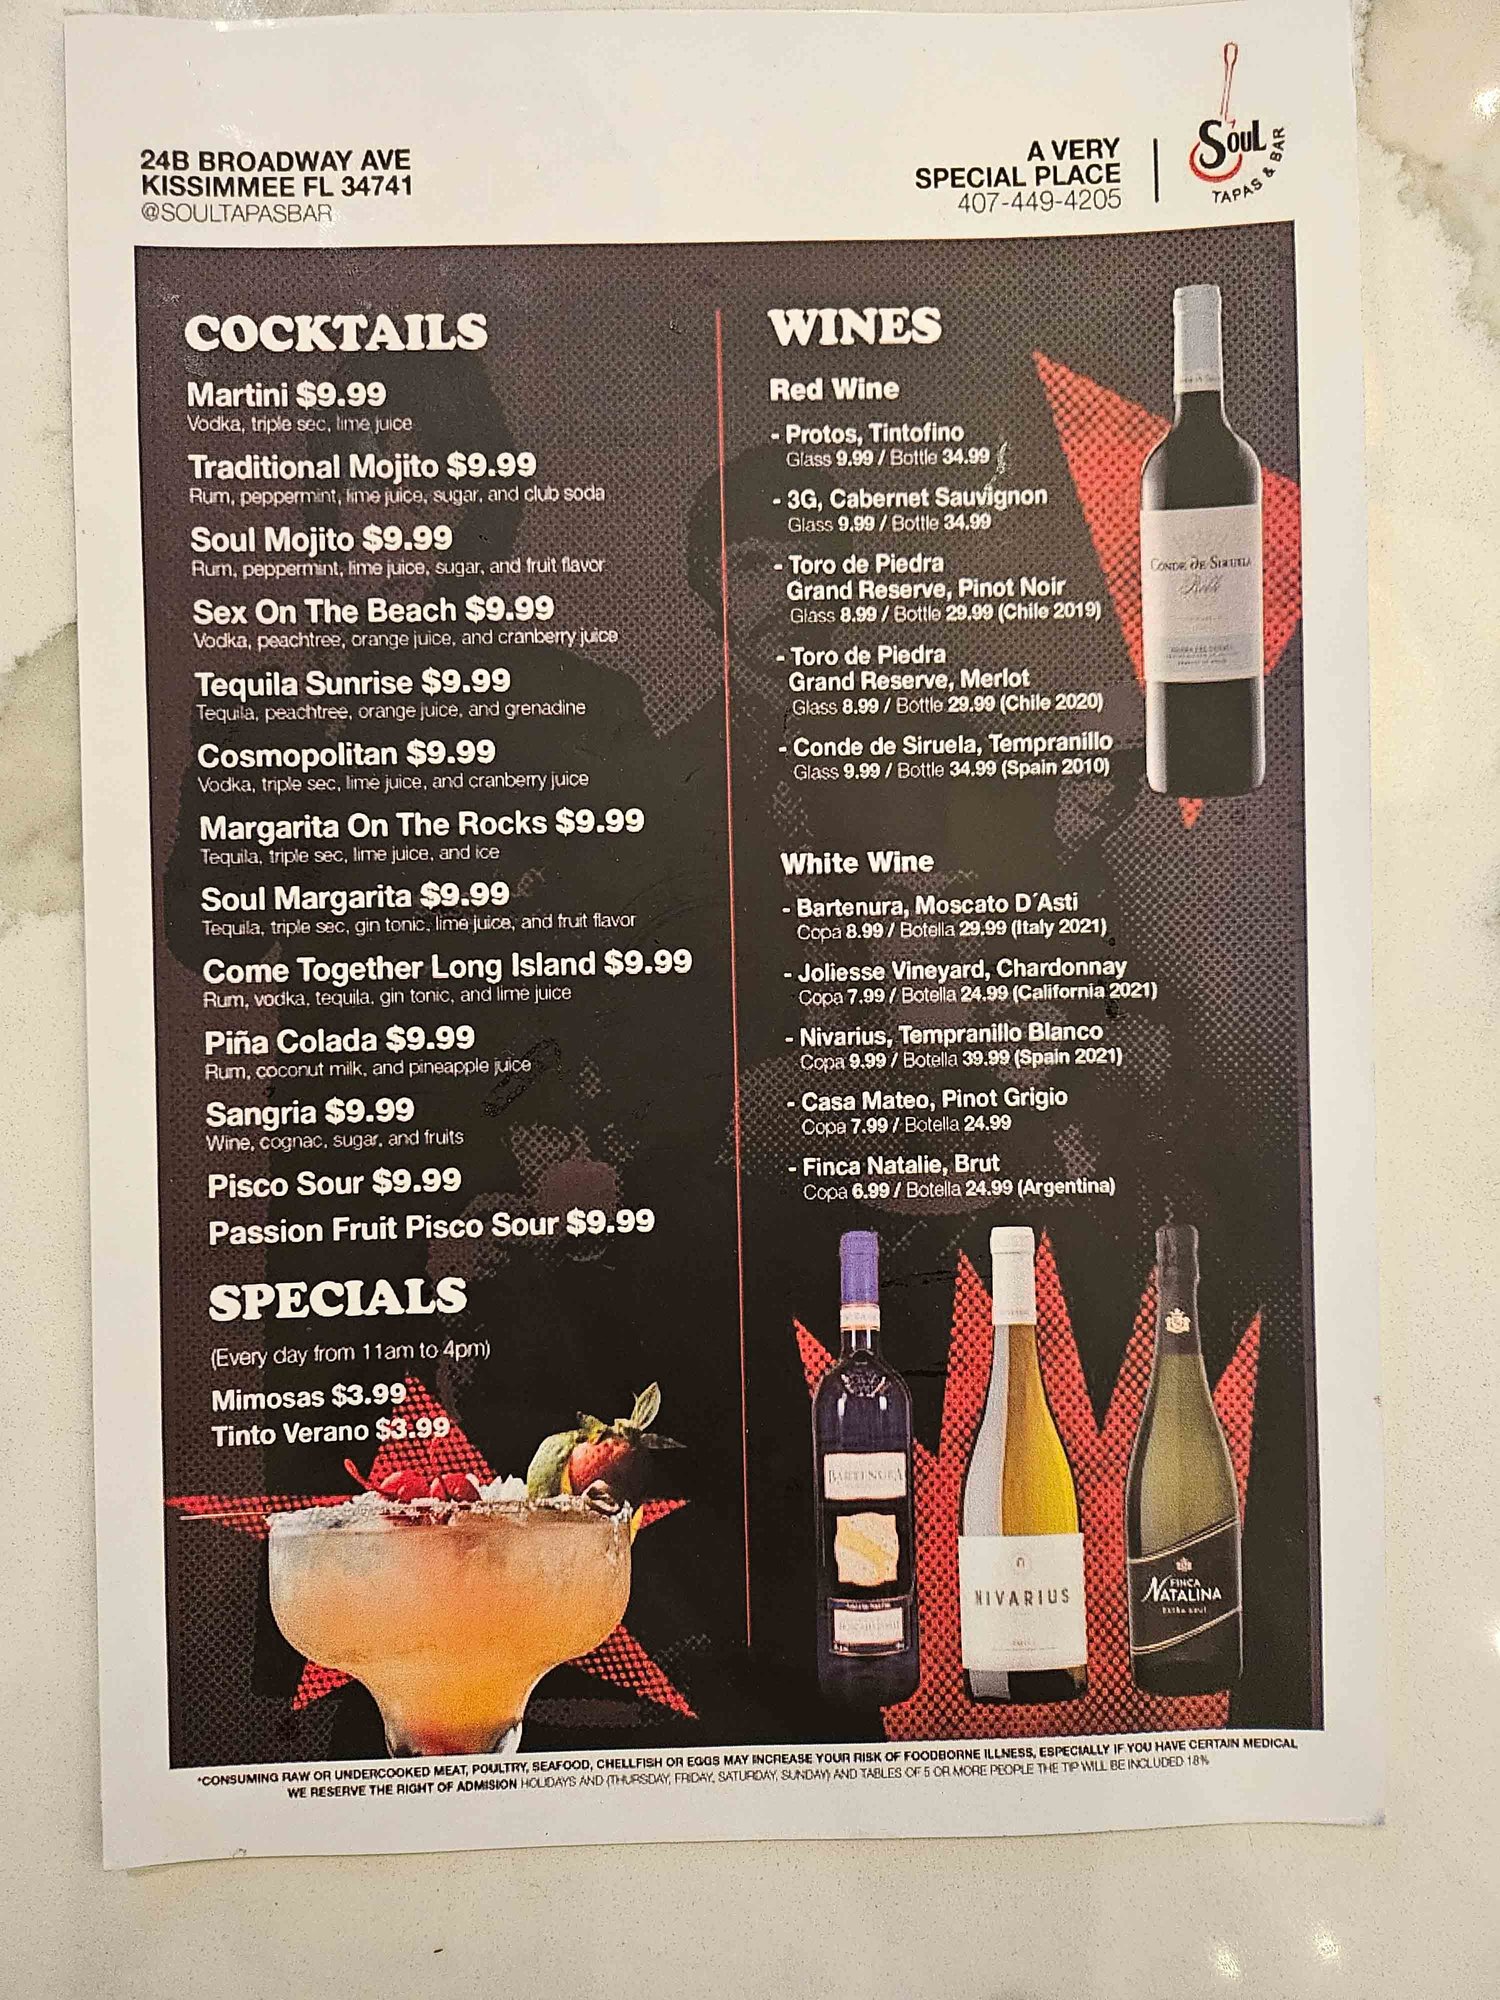 black laminated menu with alcoholic drinks and images